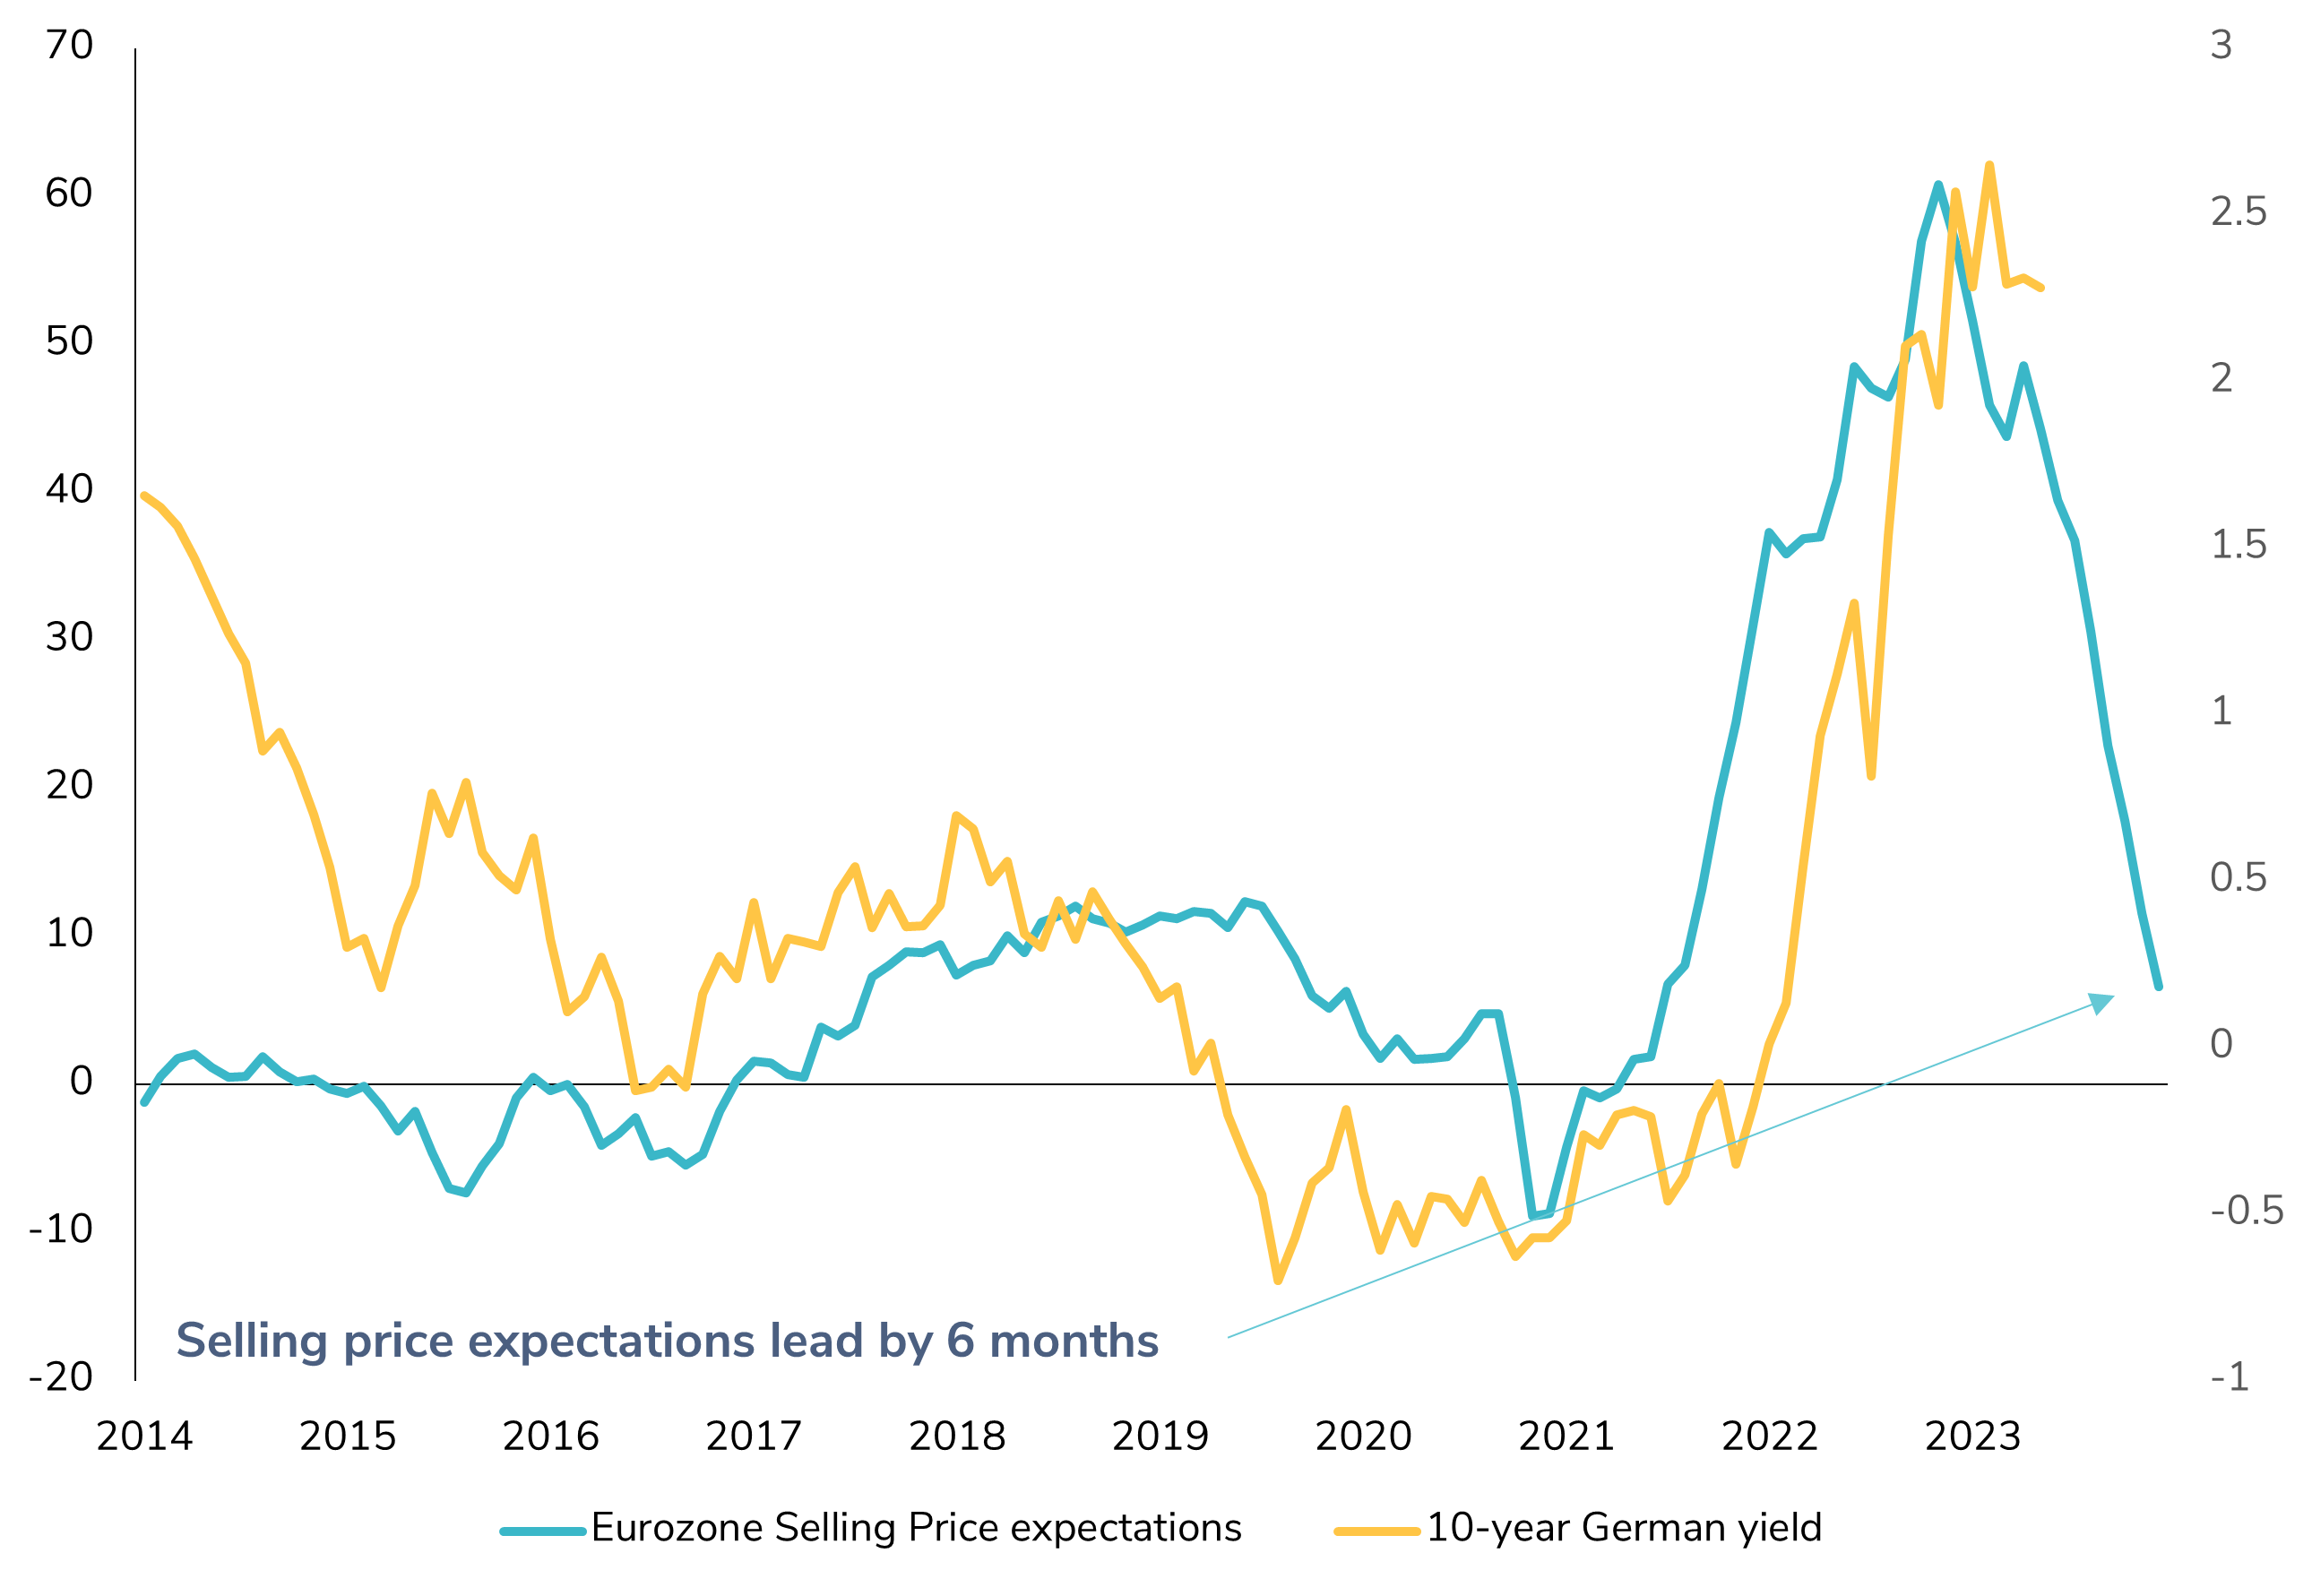 Is it time to increase duration in EUR bonds?